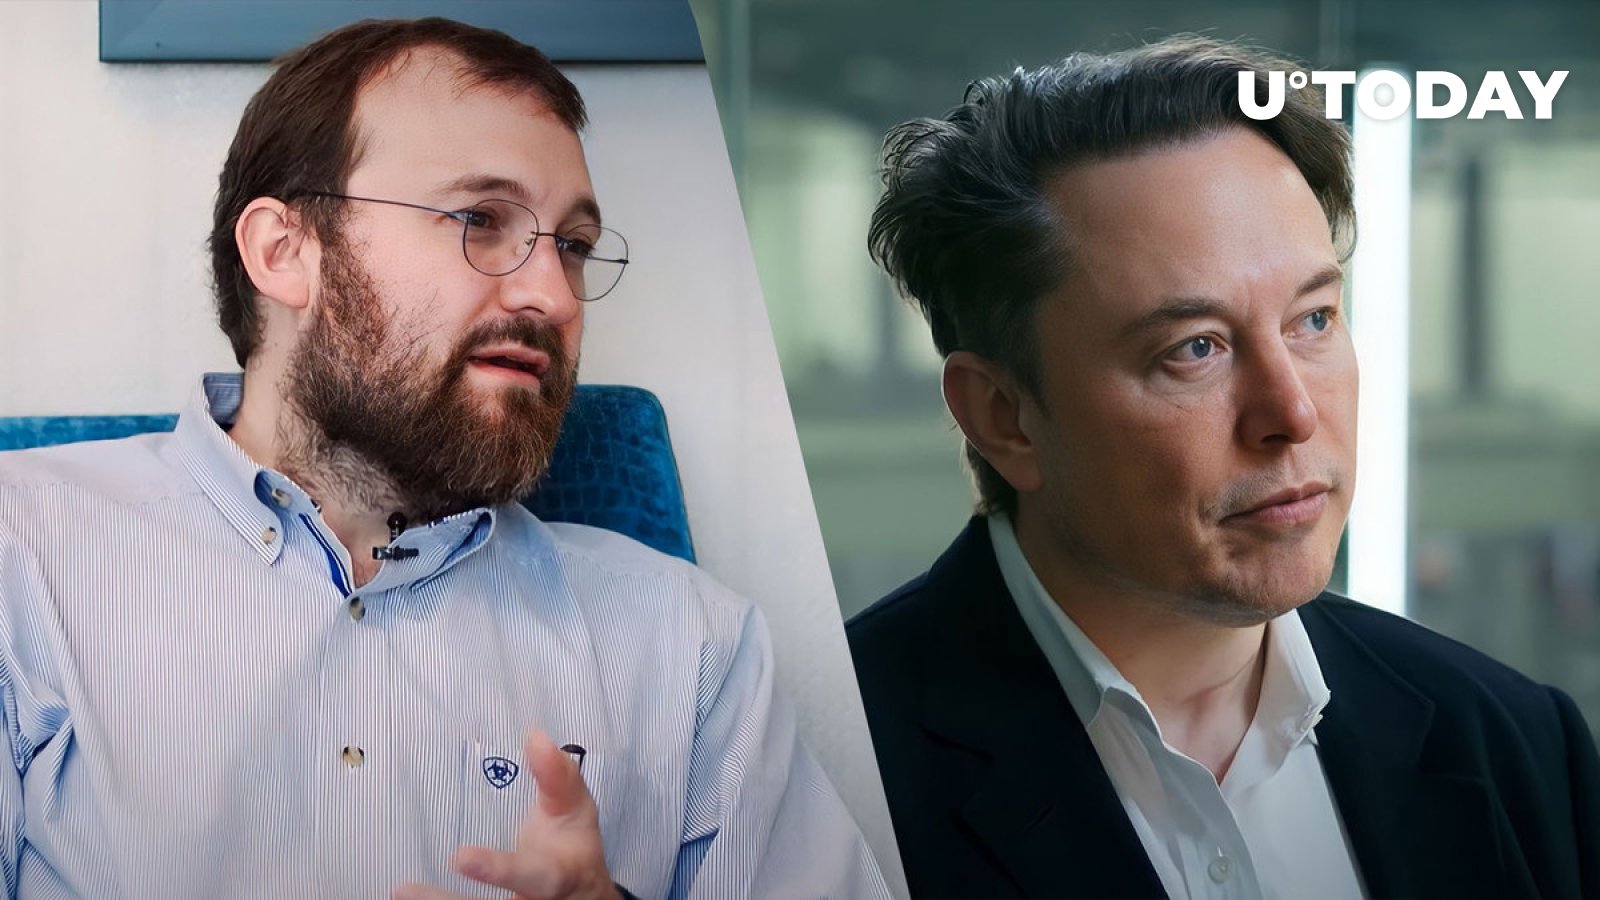 Cardano Founder on Musk, DOGE and Twitter: “If You’re Crazy and Rich, You Can Make It Work”